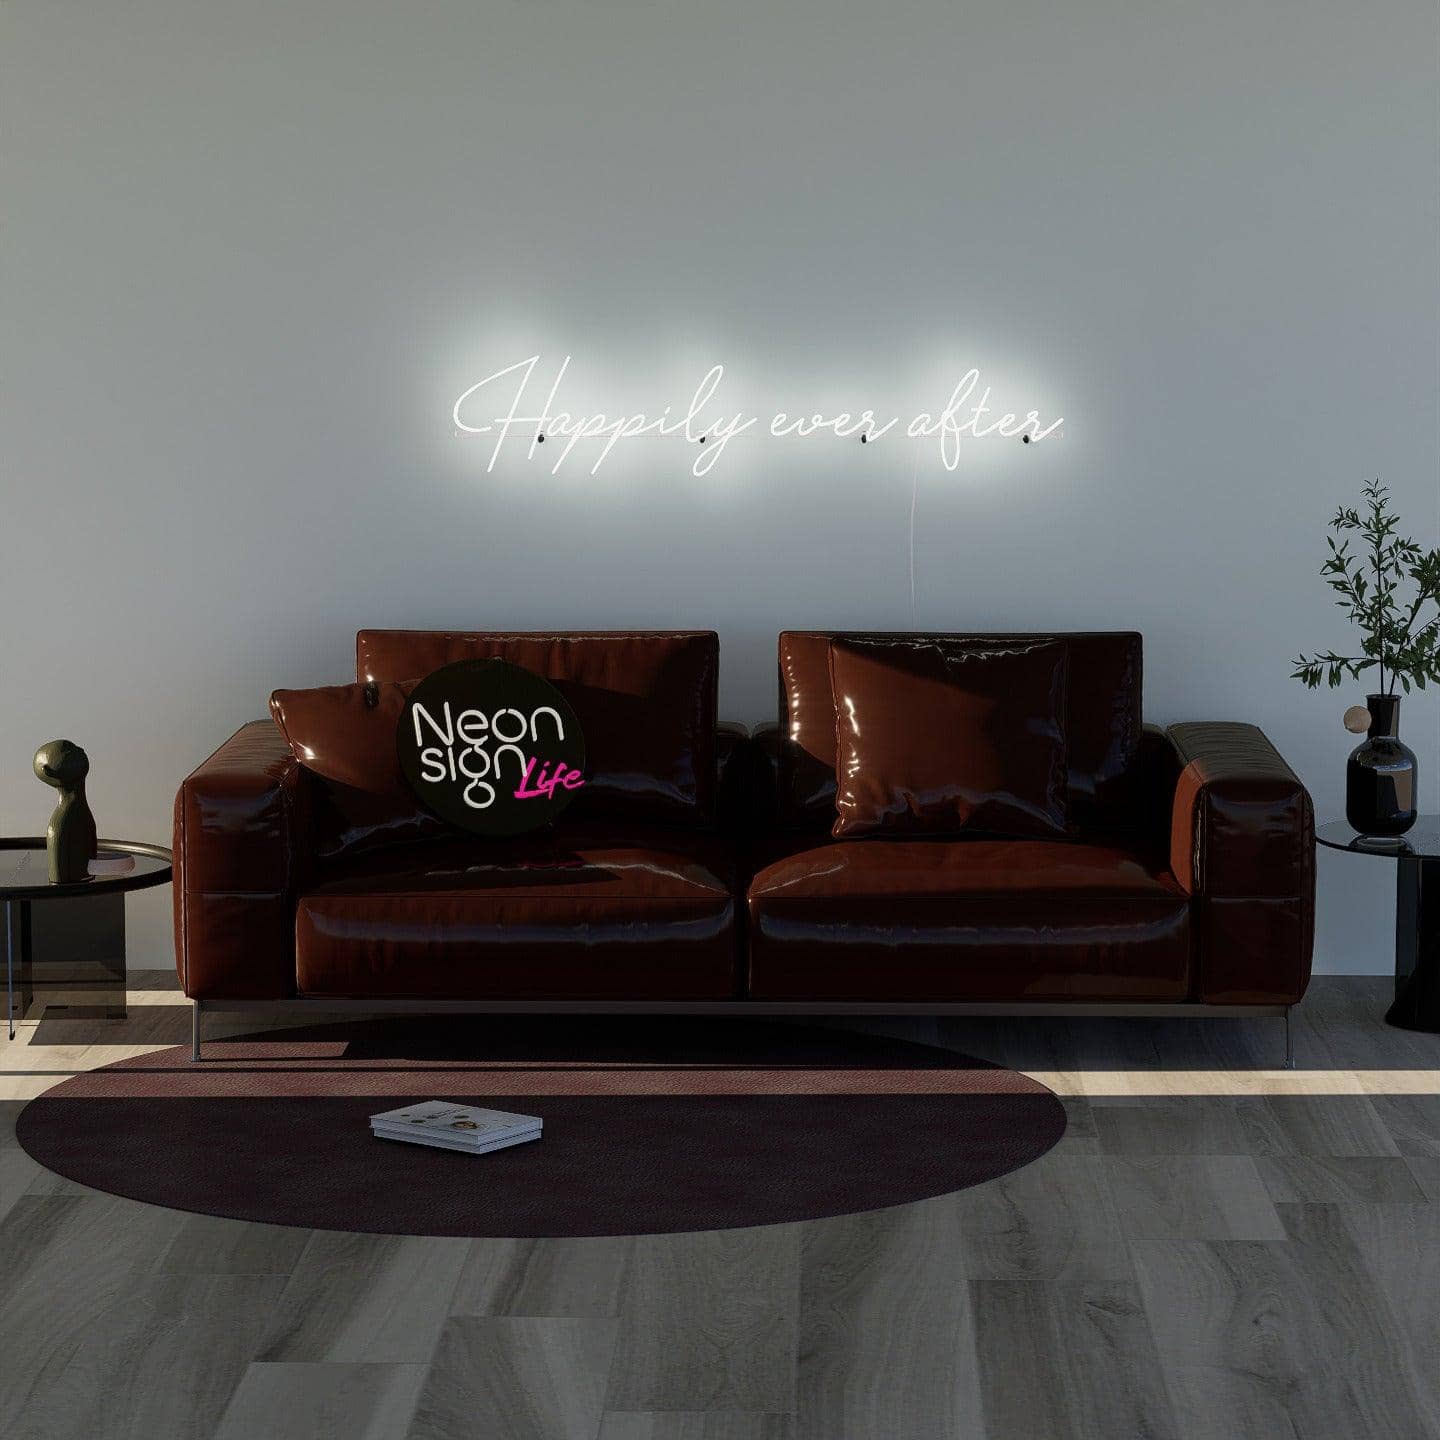 frontal-shot-of-lit-white-neon-lights-hanging-for-display-in-living-room-happily-ever-after